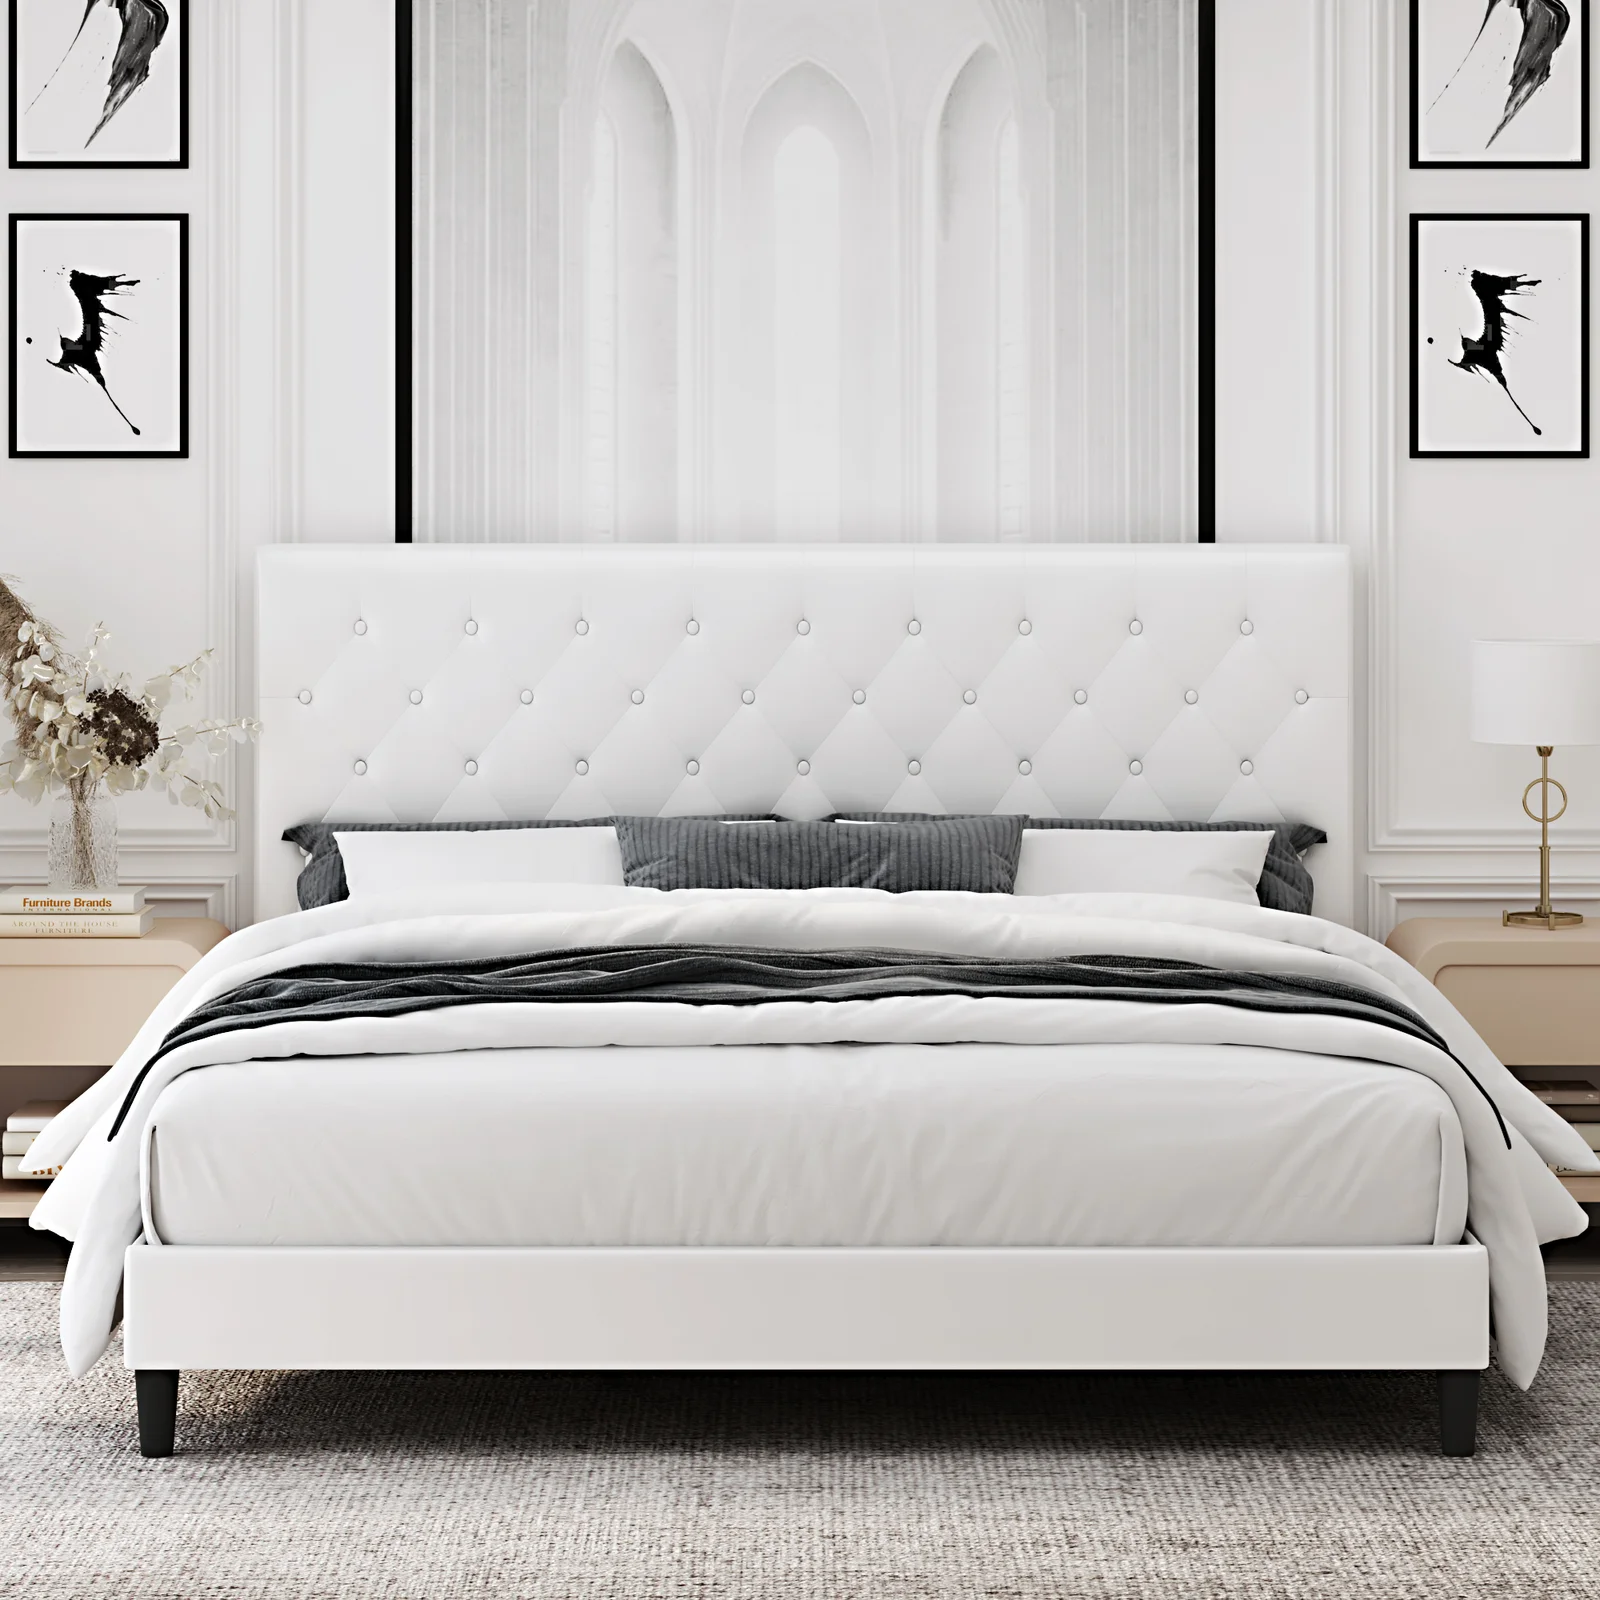 Homfa King Bed Frame, White Faux Leather Upholstered Button Tufted Low Profile Platform Bed Frame with Adjustable Headboard for Bedroom - image 5 of 8